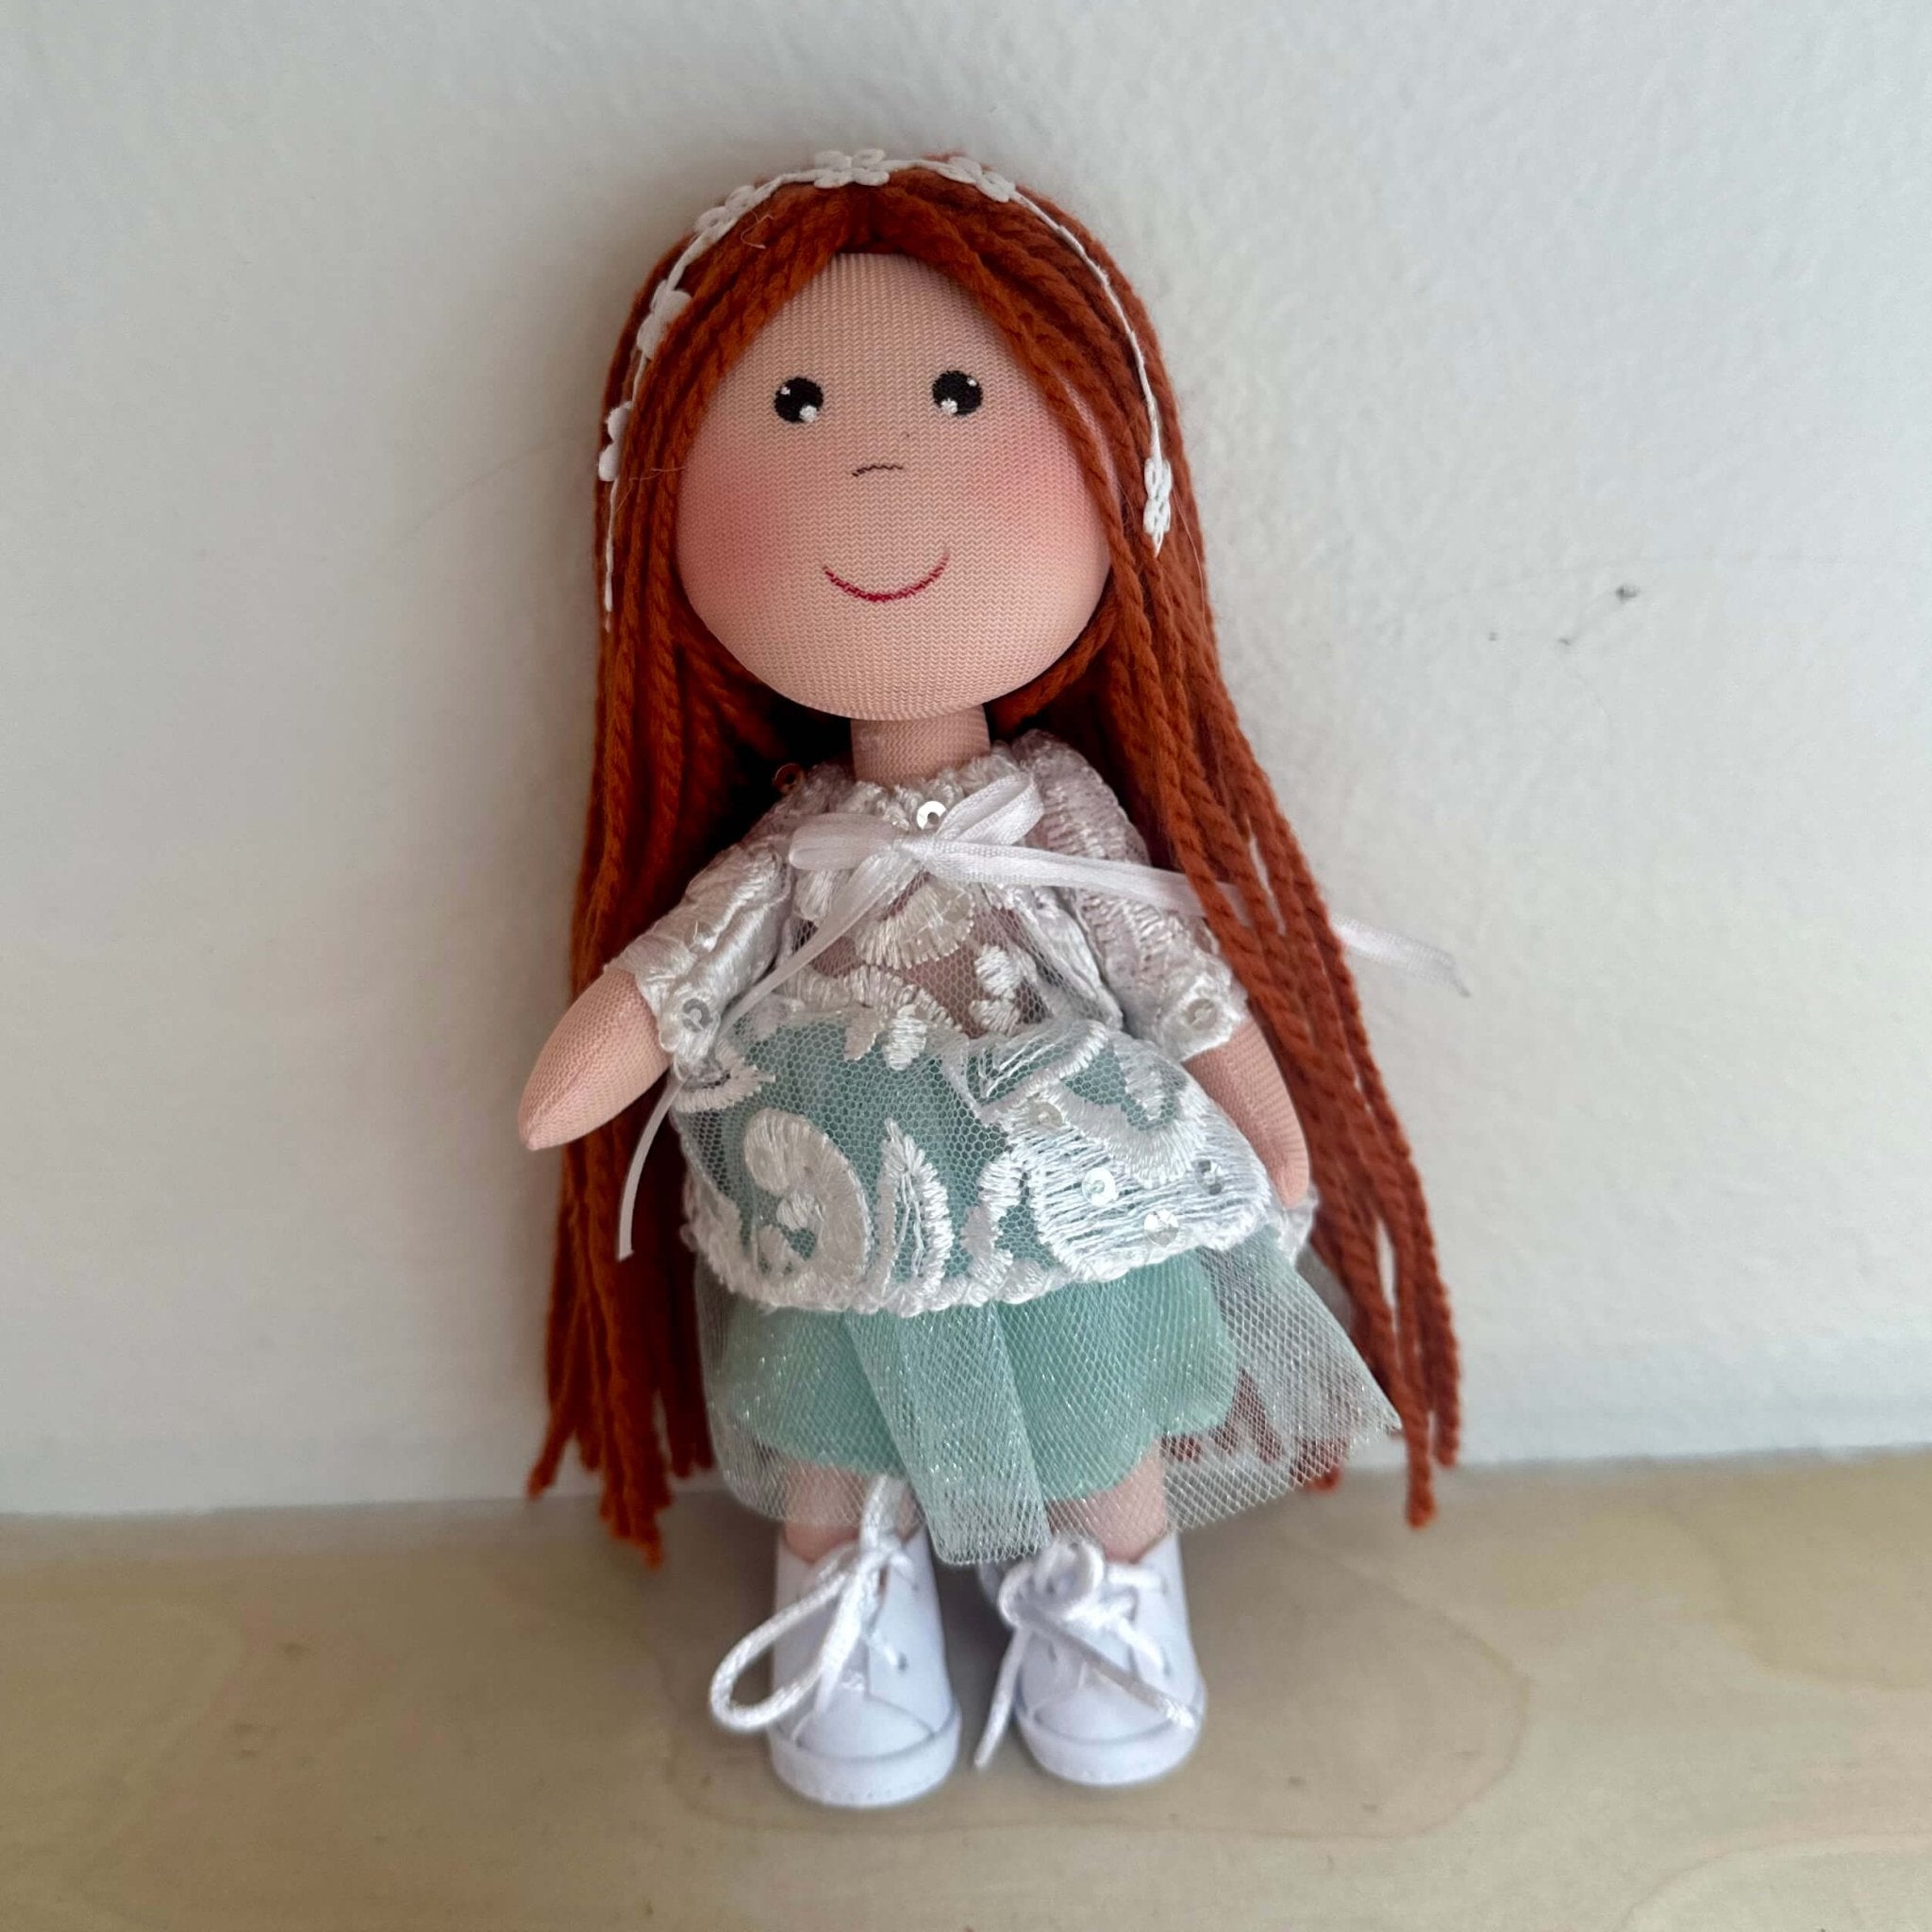 Cute rag doll handmade in Colombia. There is a doll wearing a white/mint green tutu dress with red hair. She is also wearing a flower headbands.